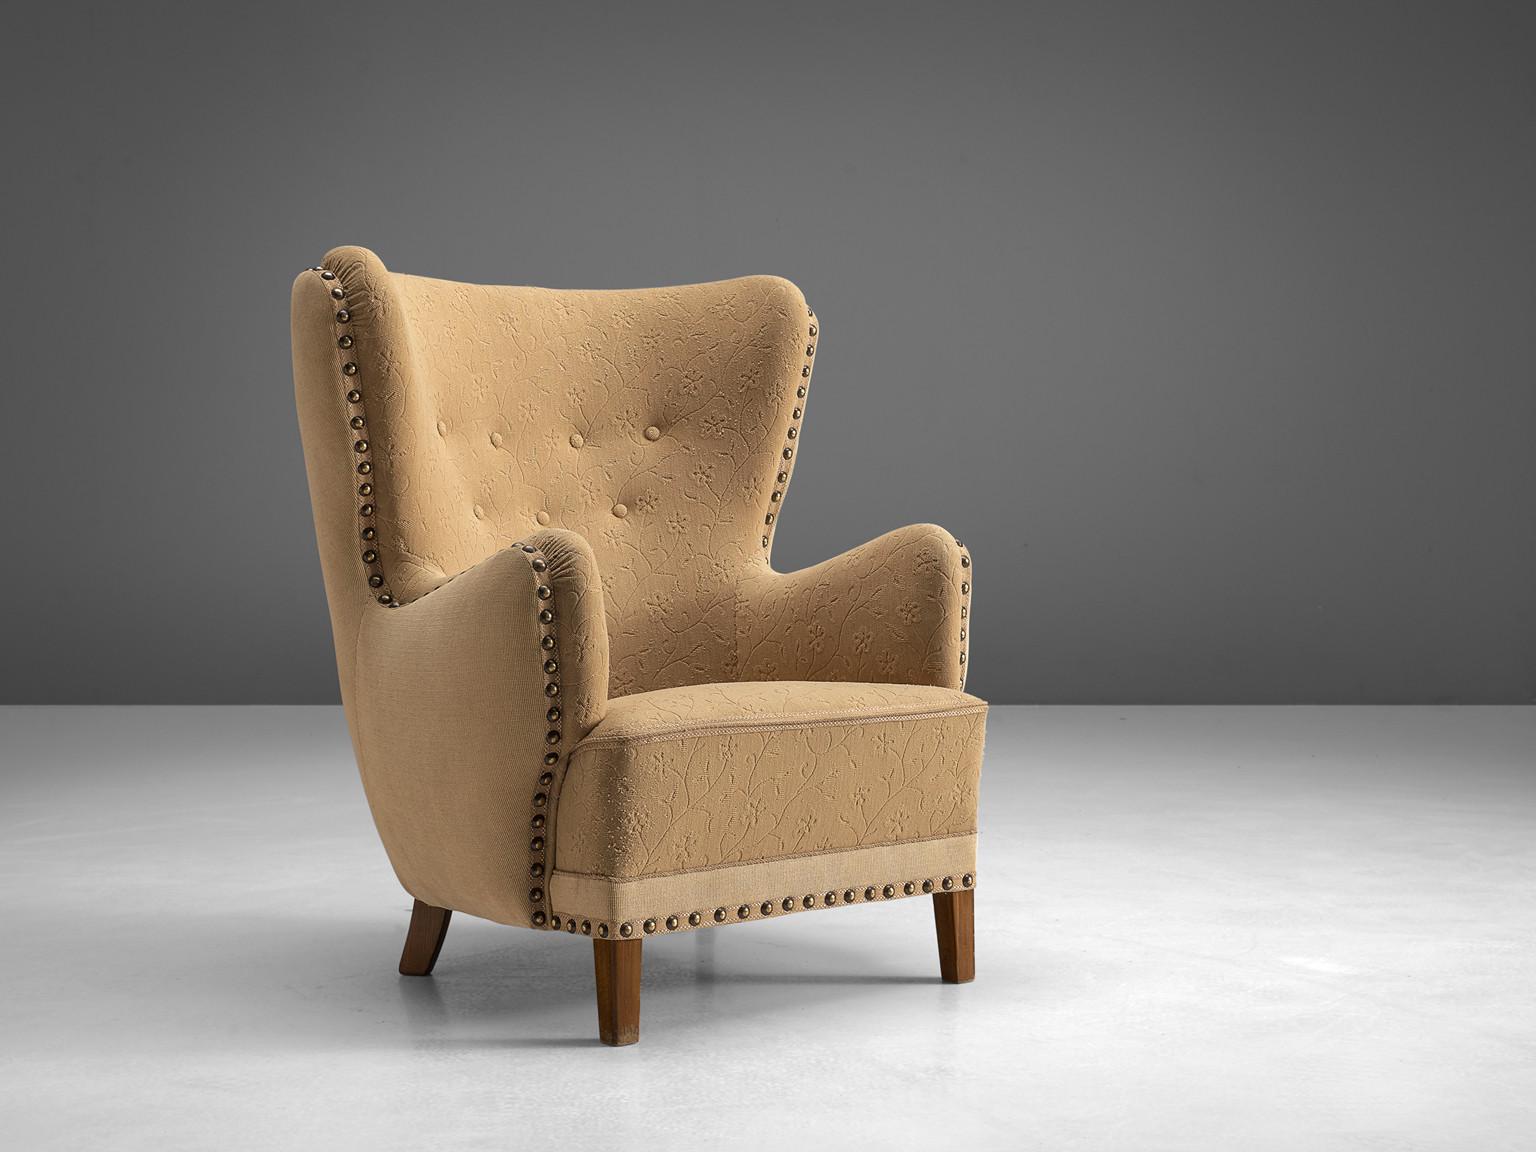 Lounge chair, stained beech, beige fabric, Denmark, 1950s

This archetypical wingback chair of the 1950s is both extremely comfortable and pleasing to the eyes. This easy chair with stained beech legs features a modest wing and buttoned back. The